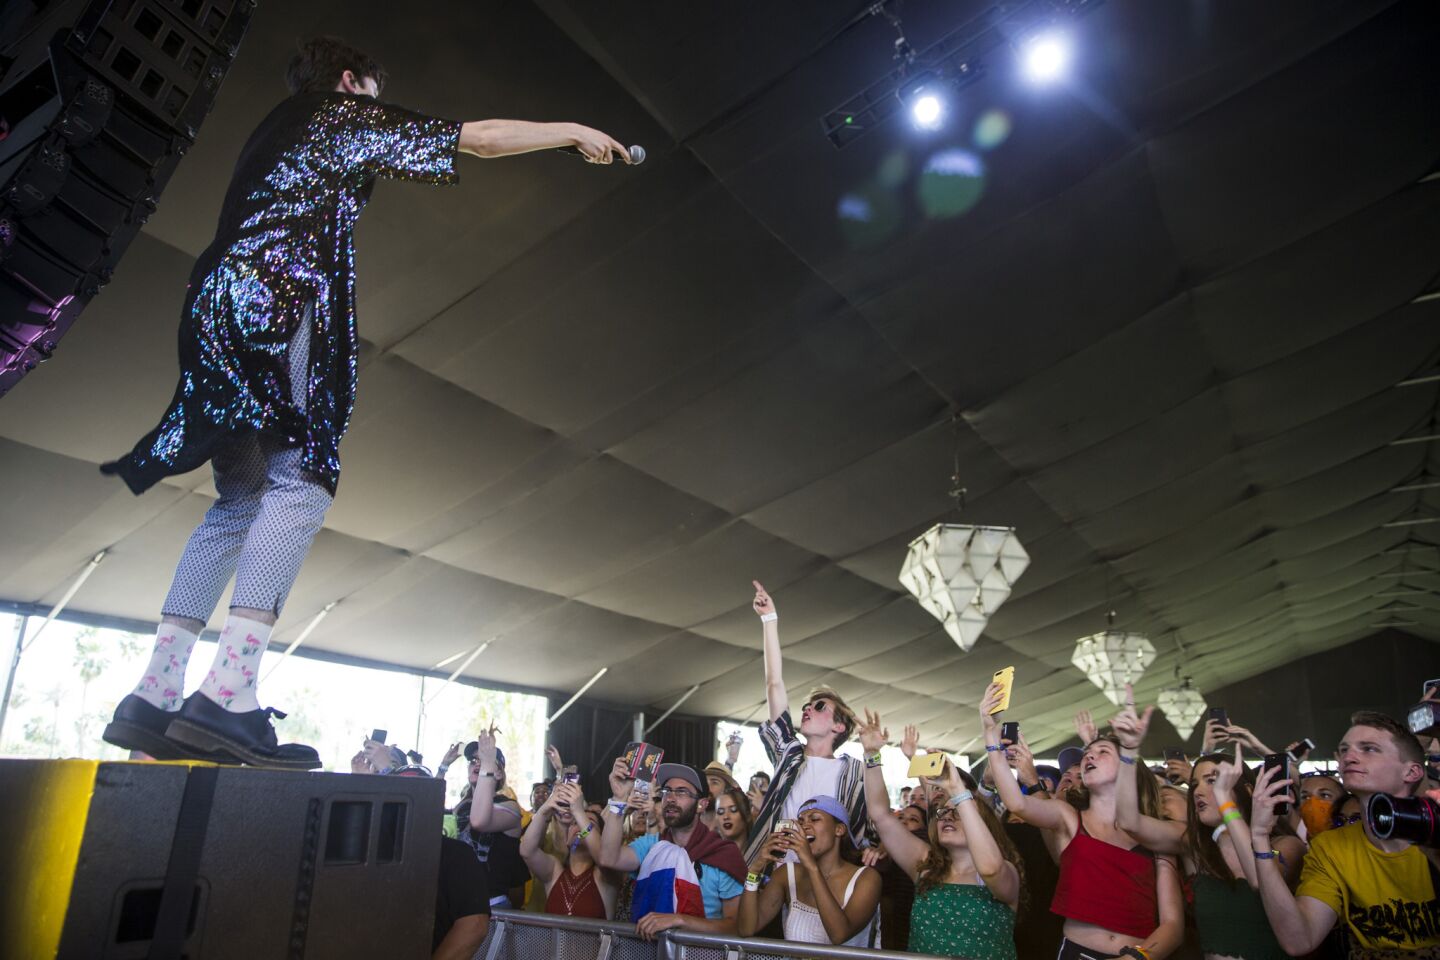 Declan McKenna performs at the Mojave stage during Day 2 of the Coachella Valley Arts and Music Festival at the Empire Polo Grounds on April 14 in Indio, Calif.